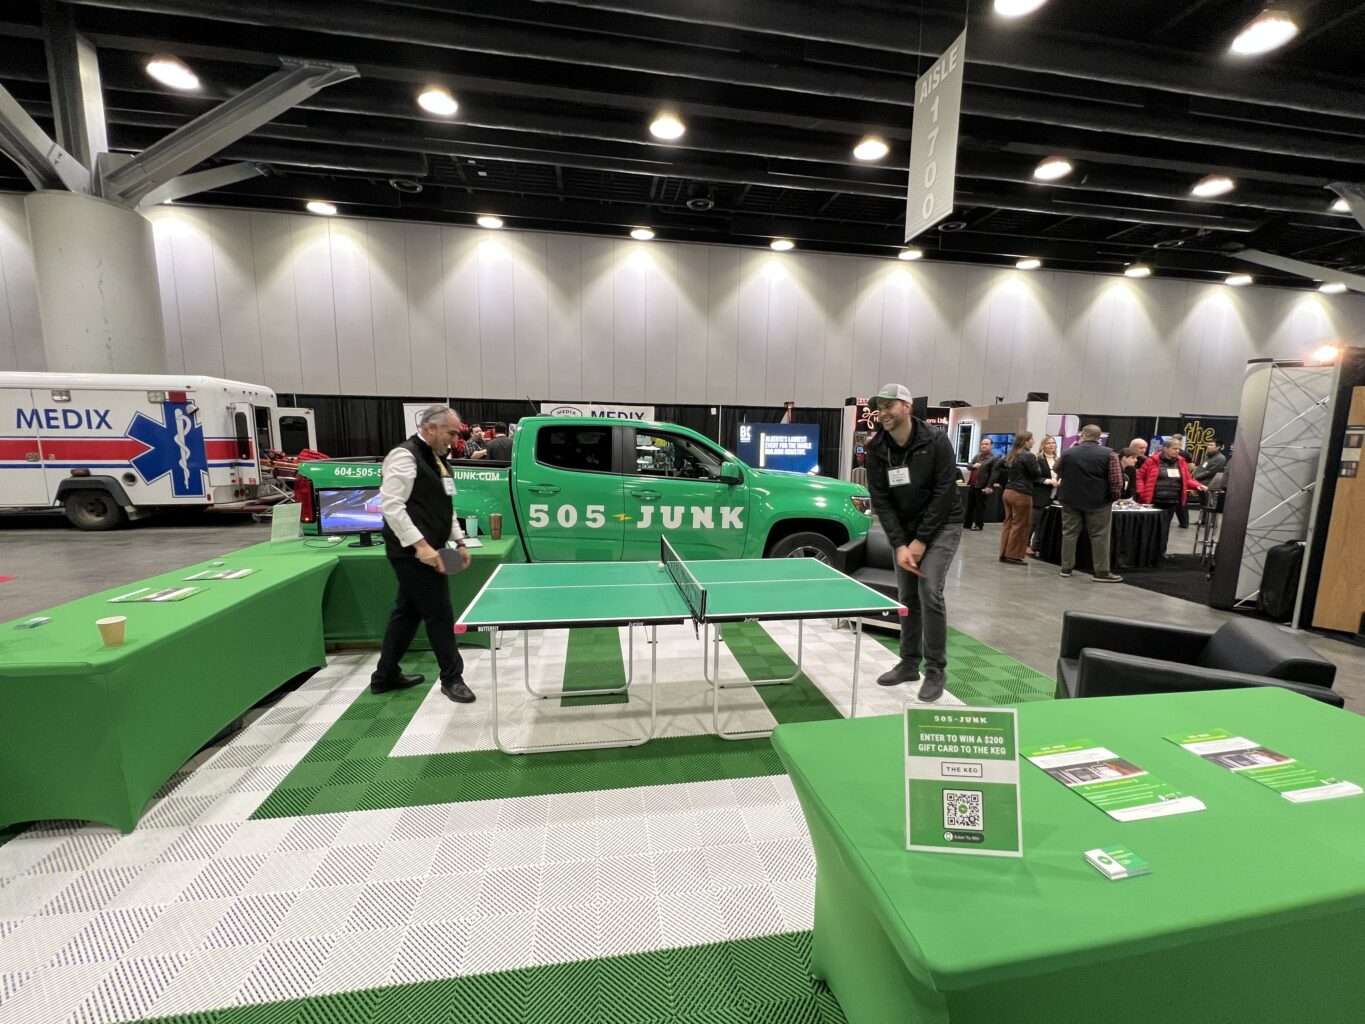 The 505-Junk booth at the Buildex tradeshow Vancouver